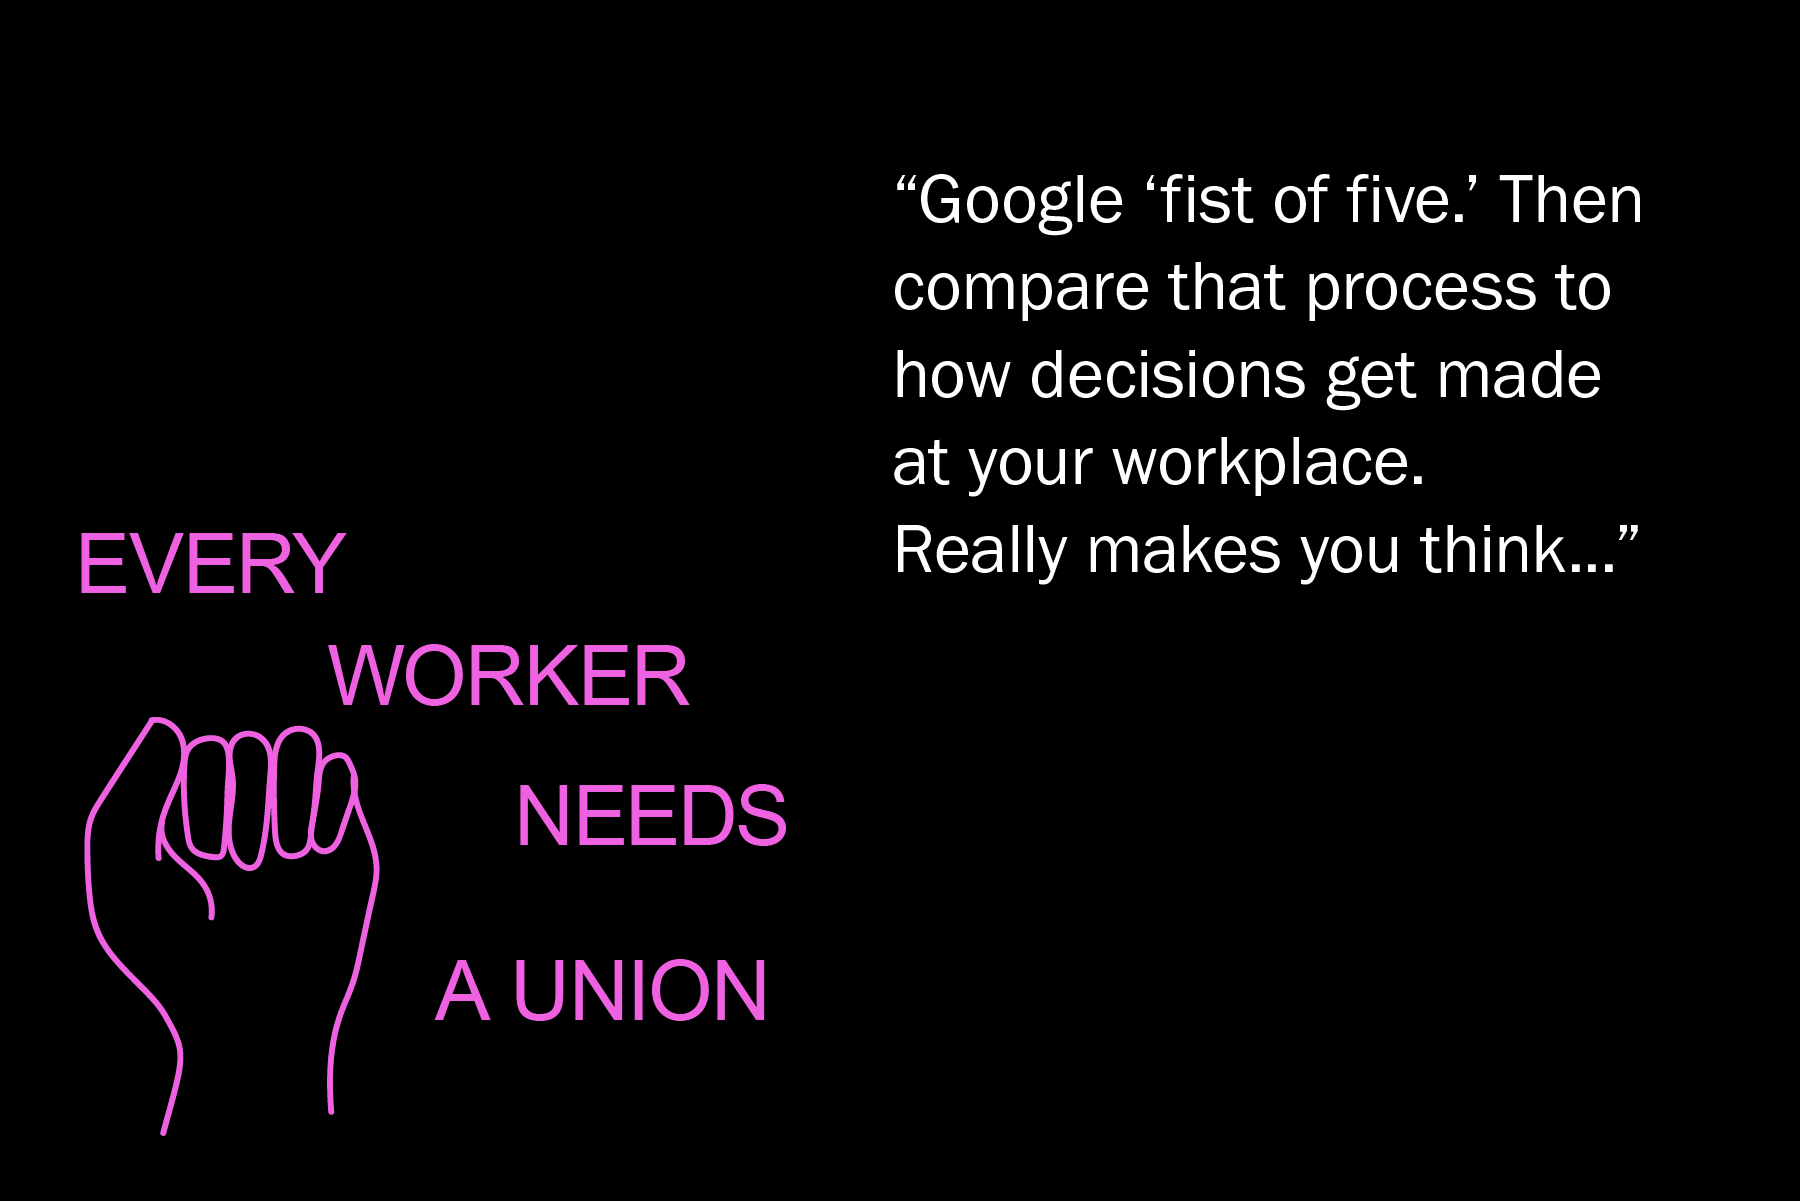 Google “fist of five.” Then compare that process to how decisions get made at your workplace. Really makes you think...